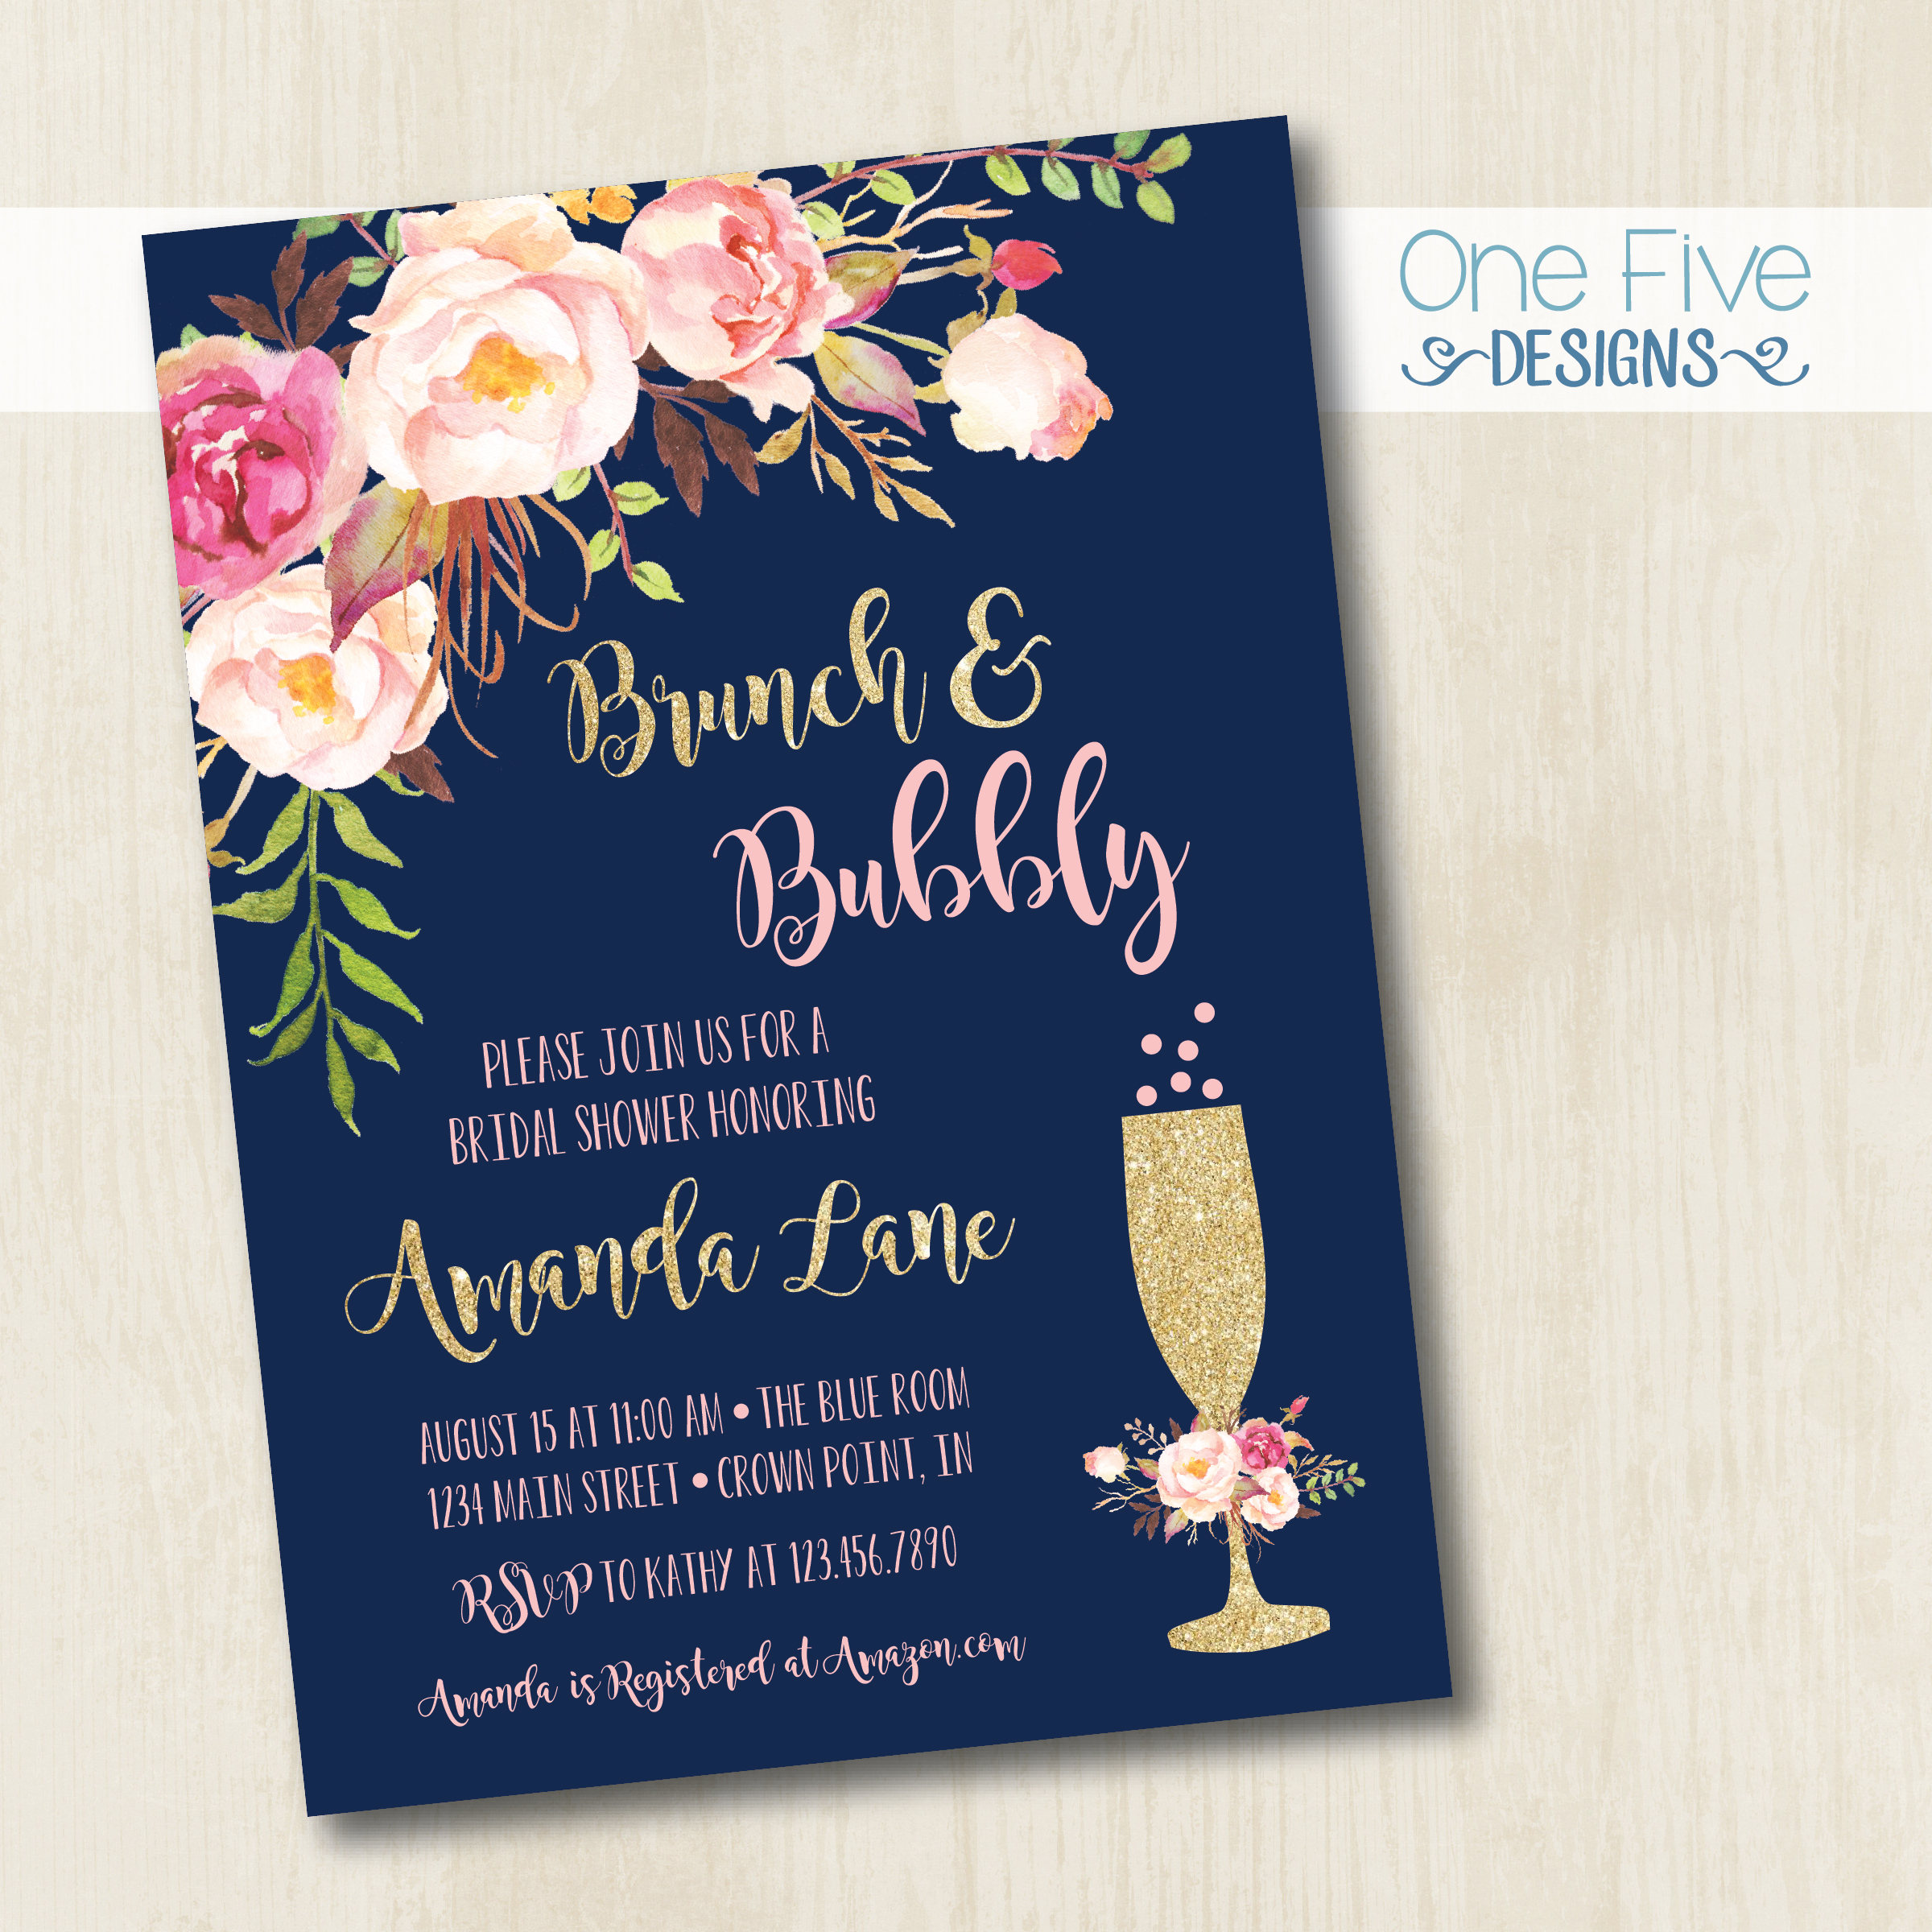 Brunch And Bubbly Bridal Shower Invitations 6